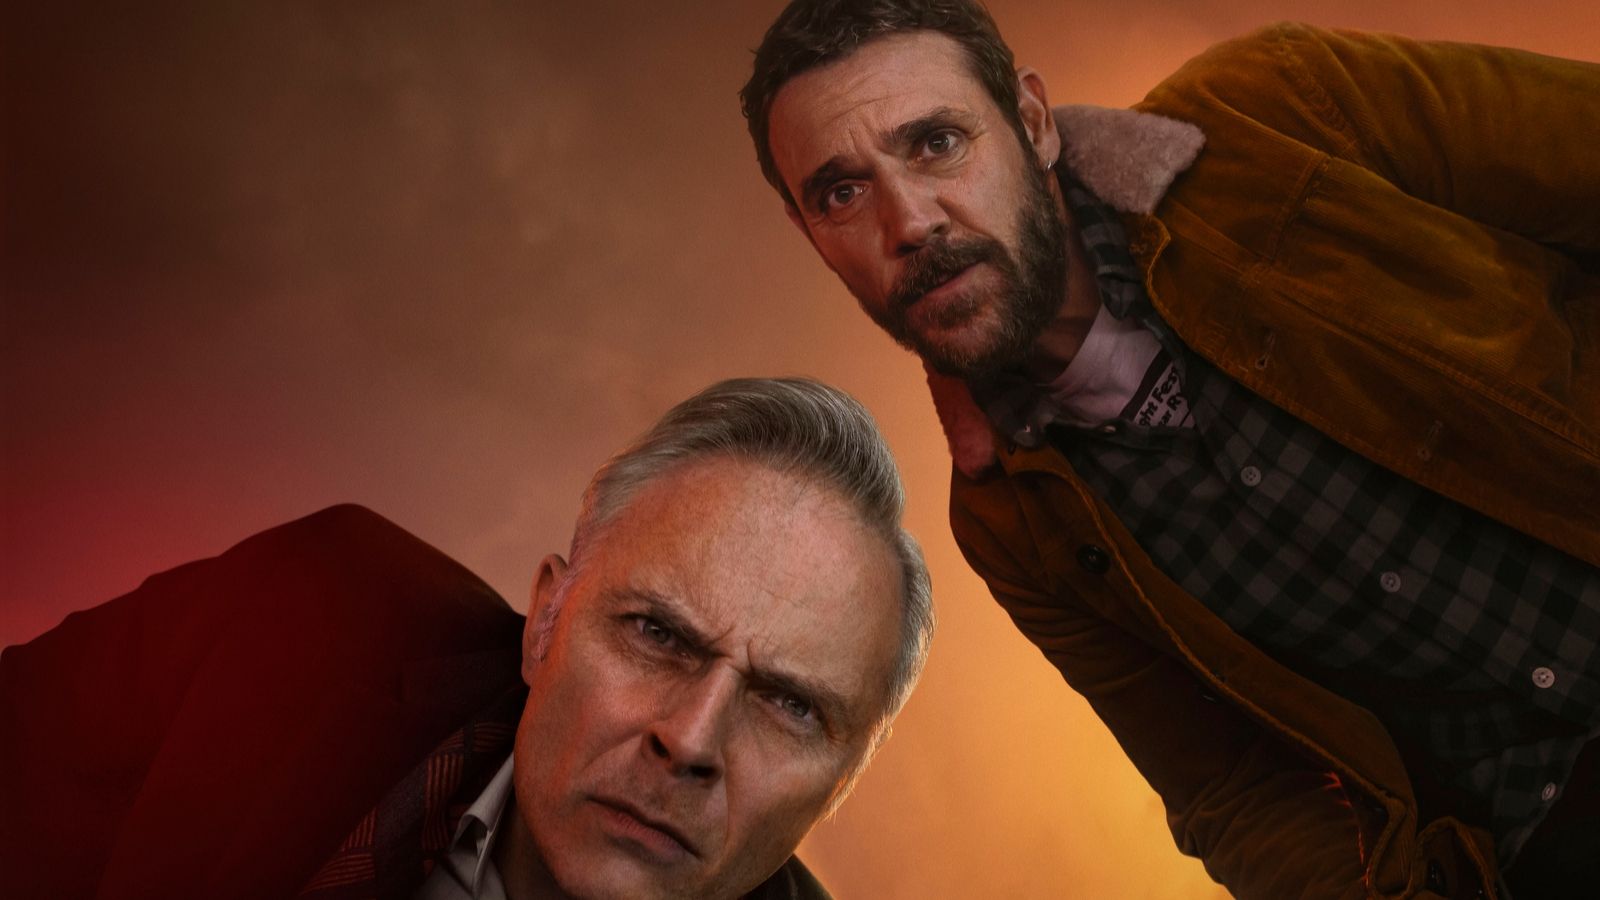 Mark Bonnar and Jamie Sives look down over the camera in a close up shot, with mist in the background